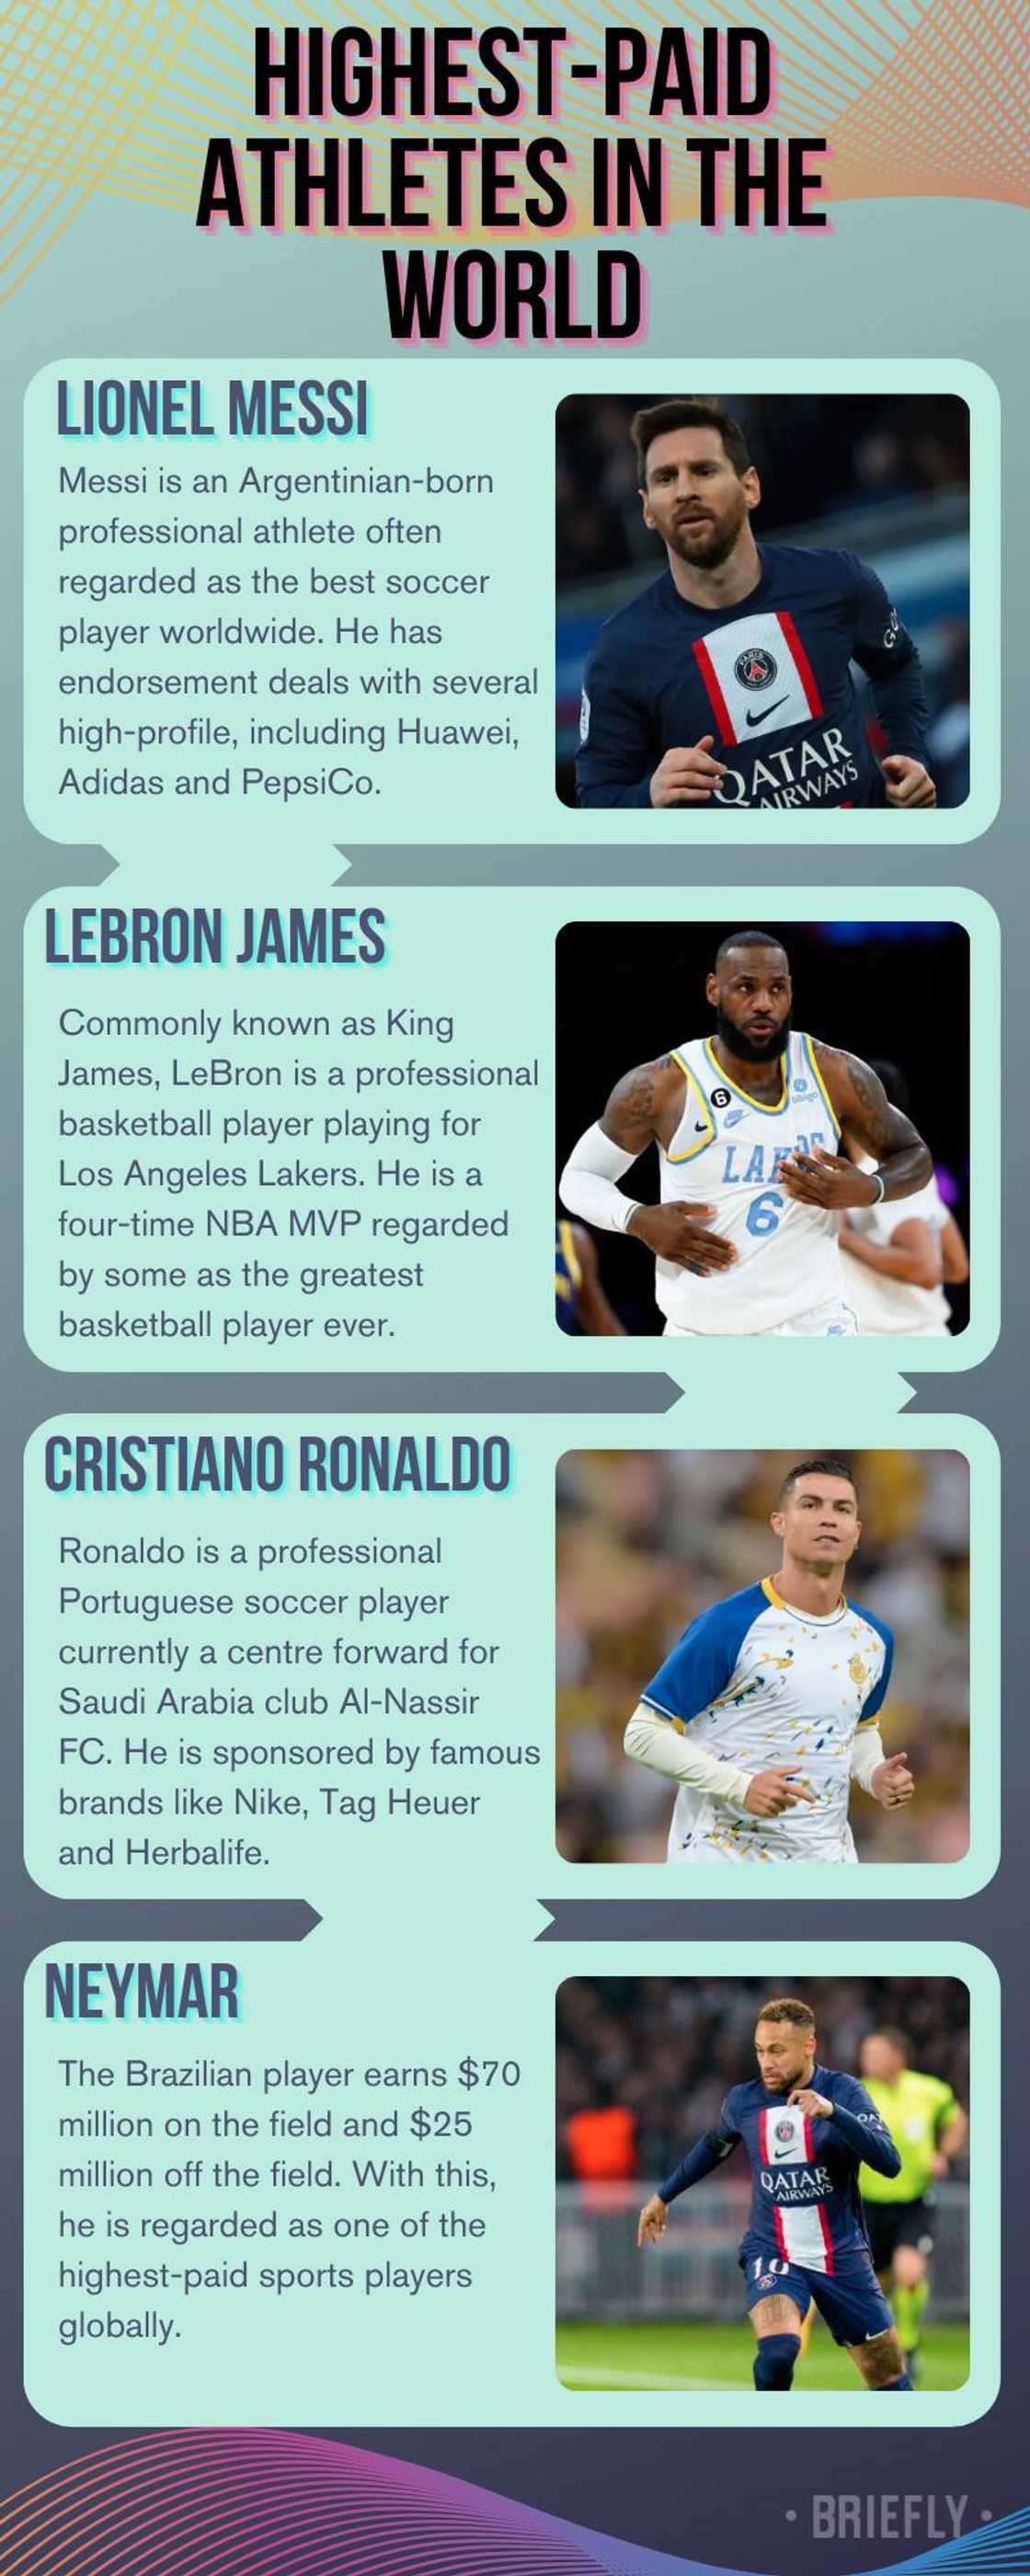 Highest-paid athletes in the world